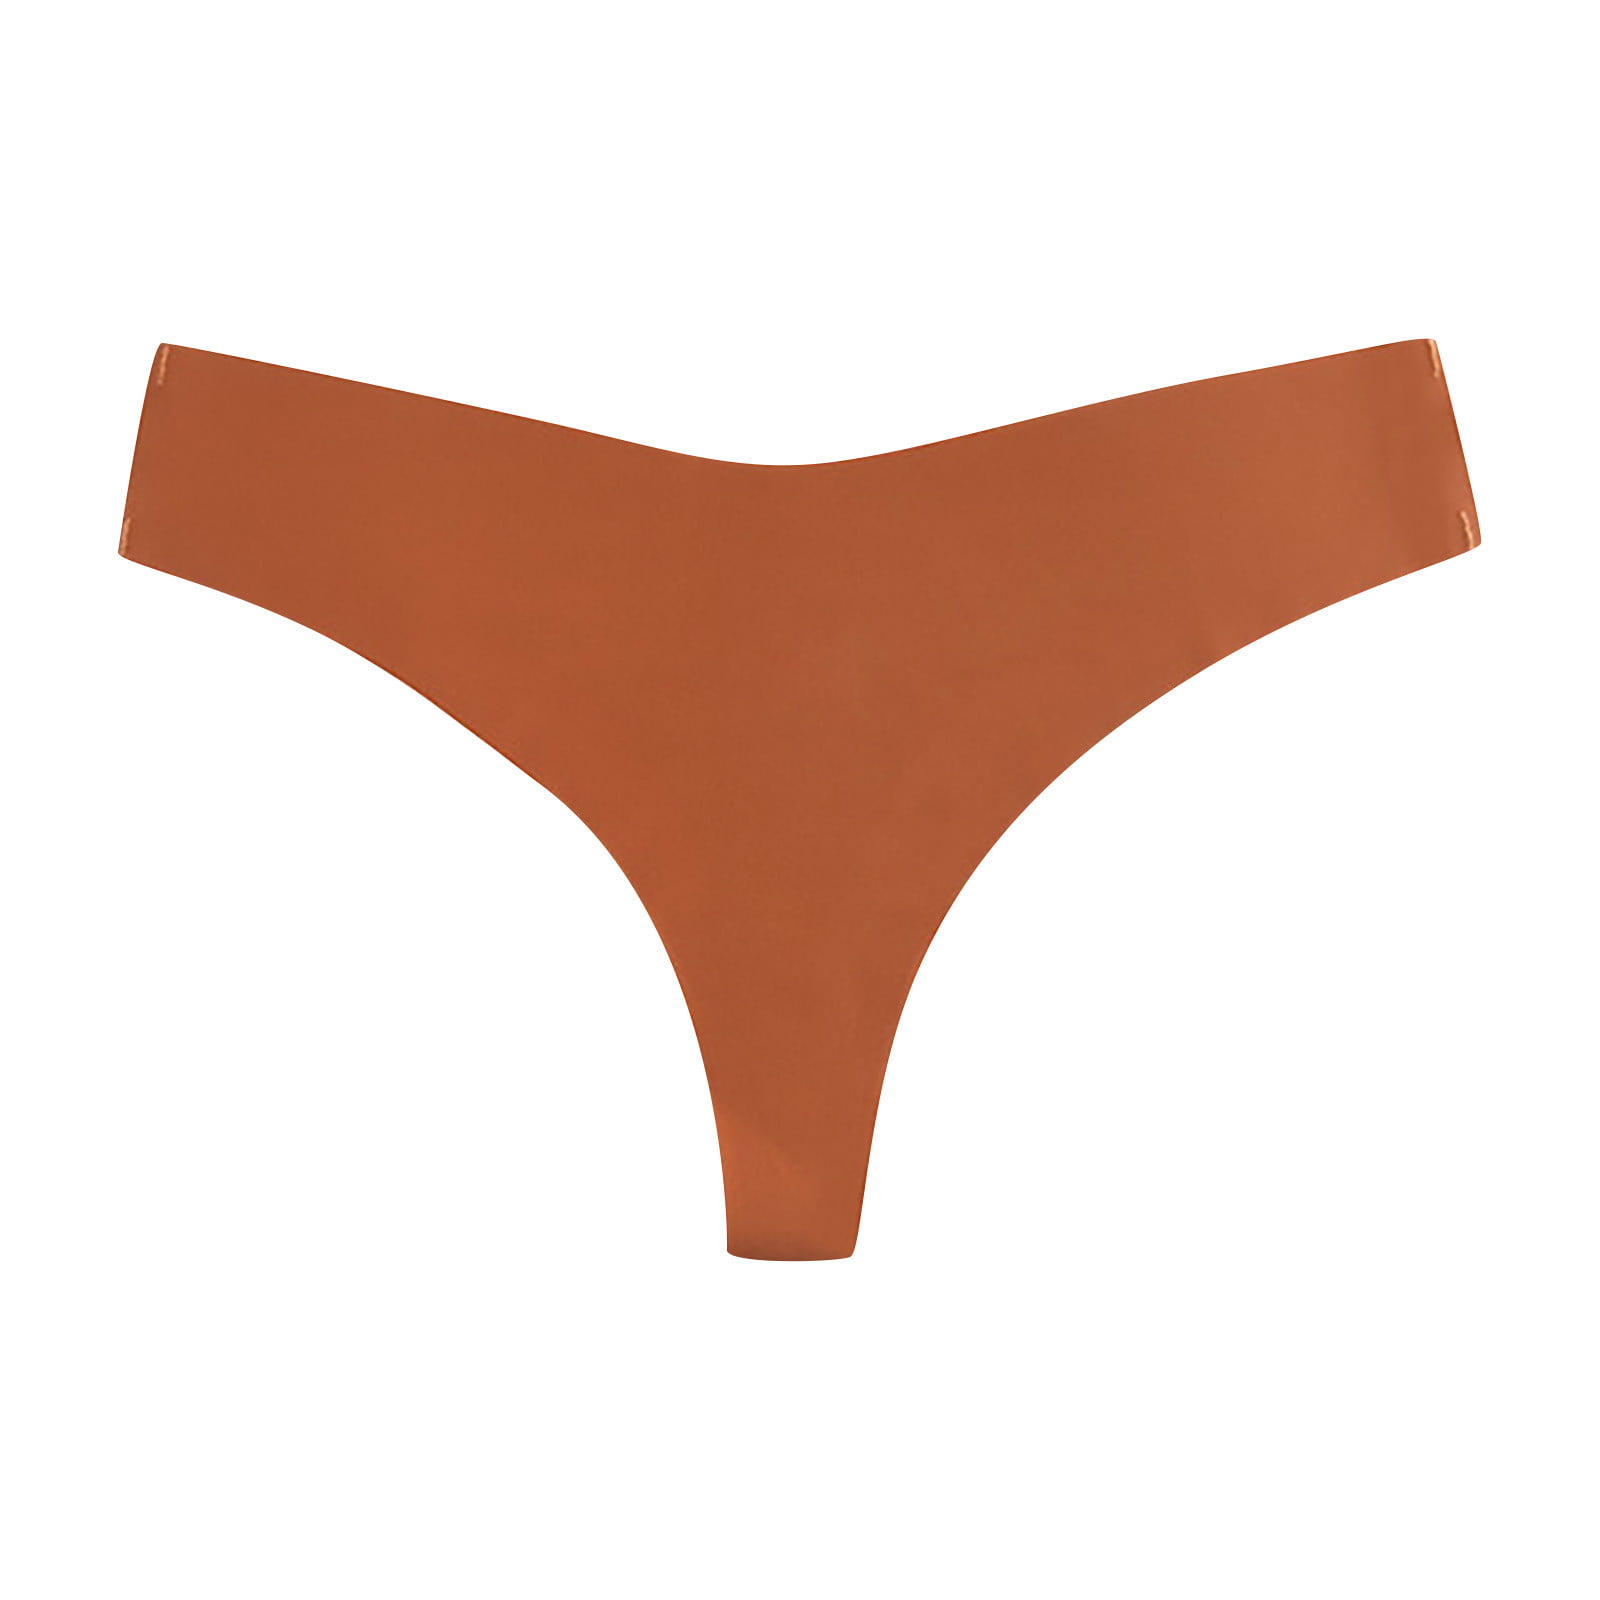 Knosfe Thongs G String Low Rise Stretch Seamless Sexy Ladies Underwear  Panties Plus Size Ginger S 